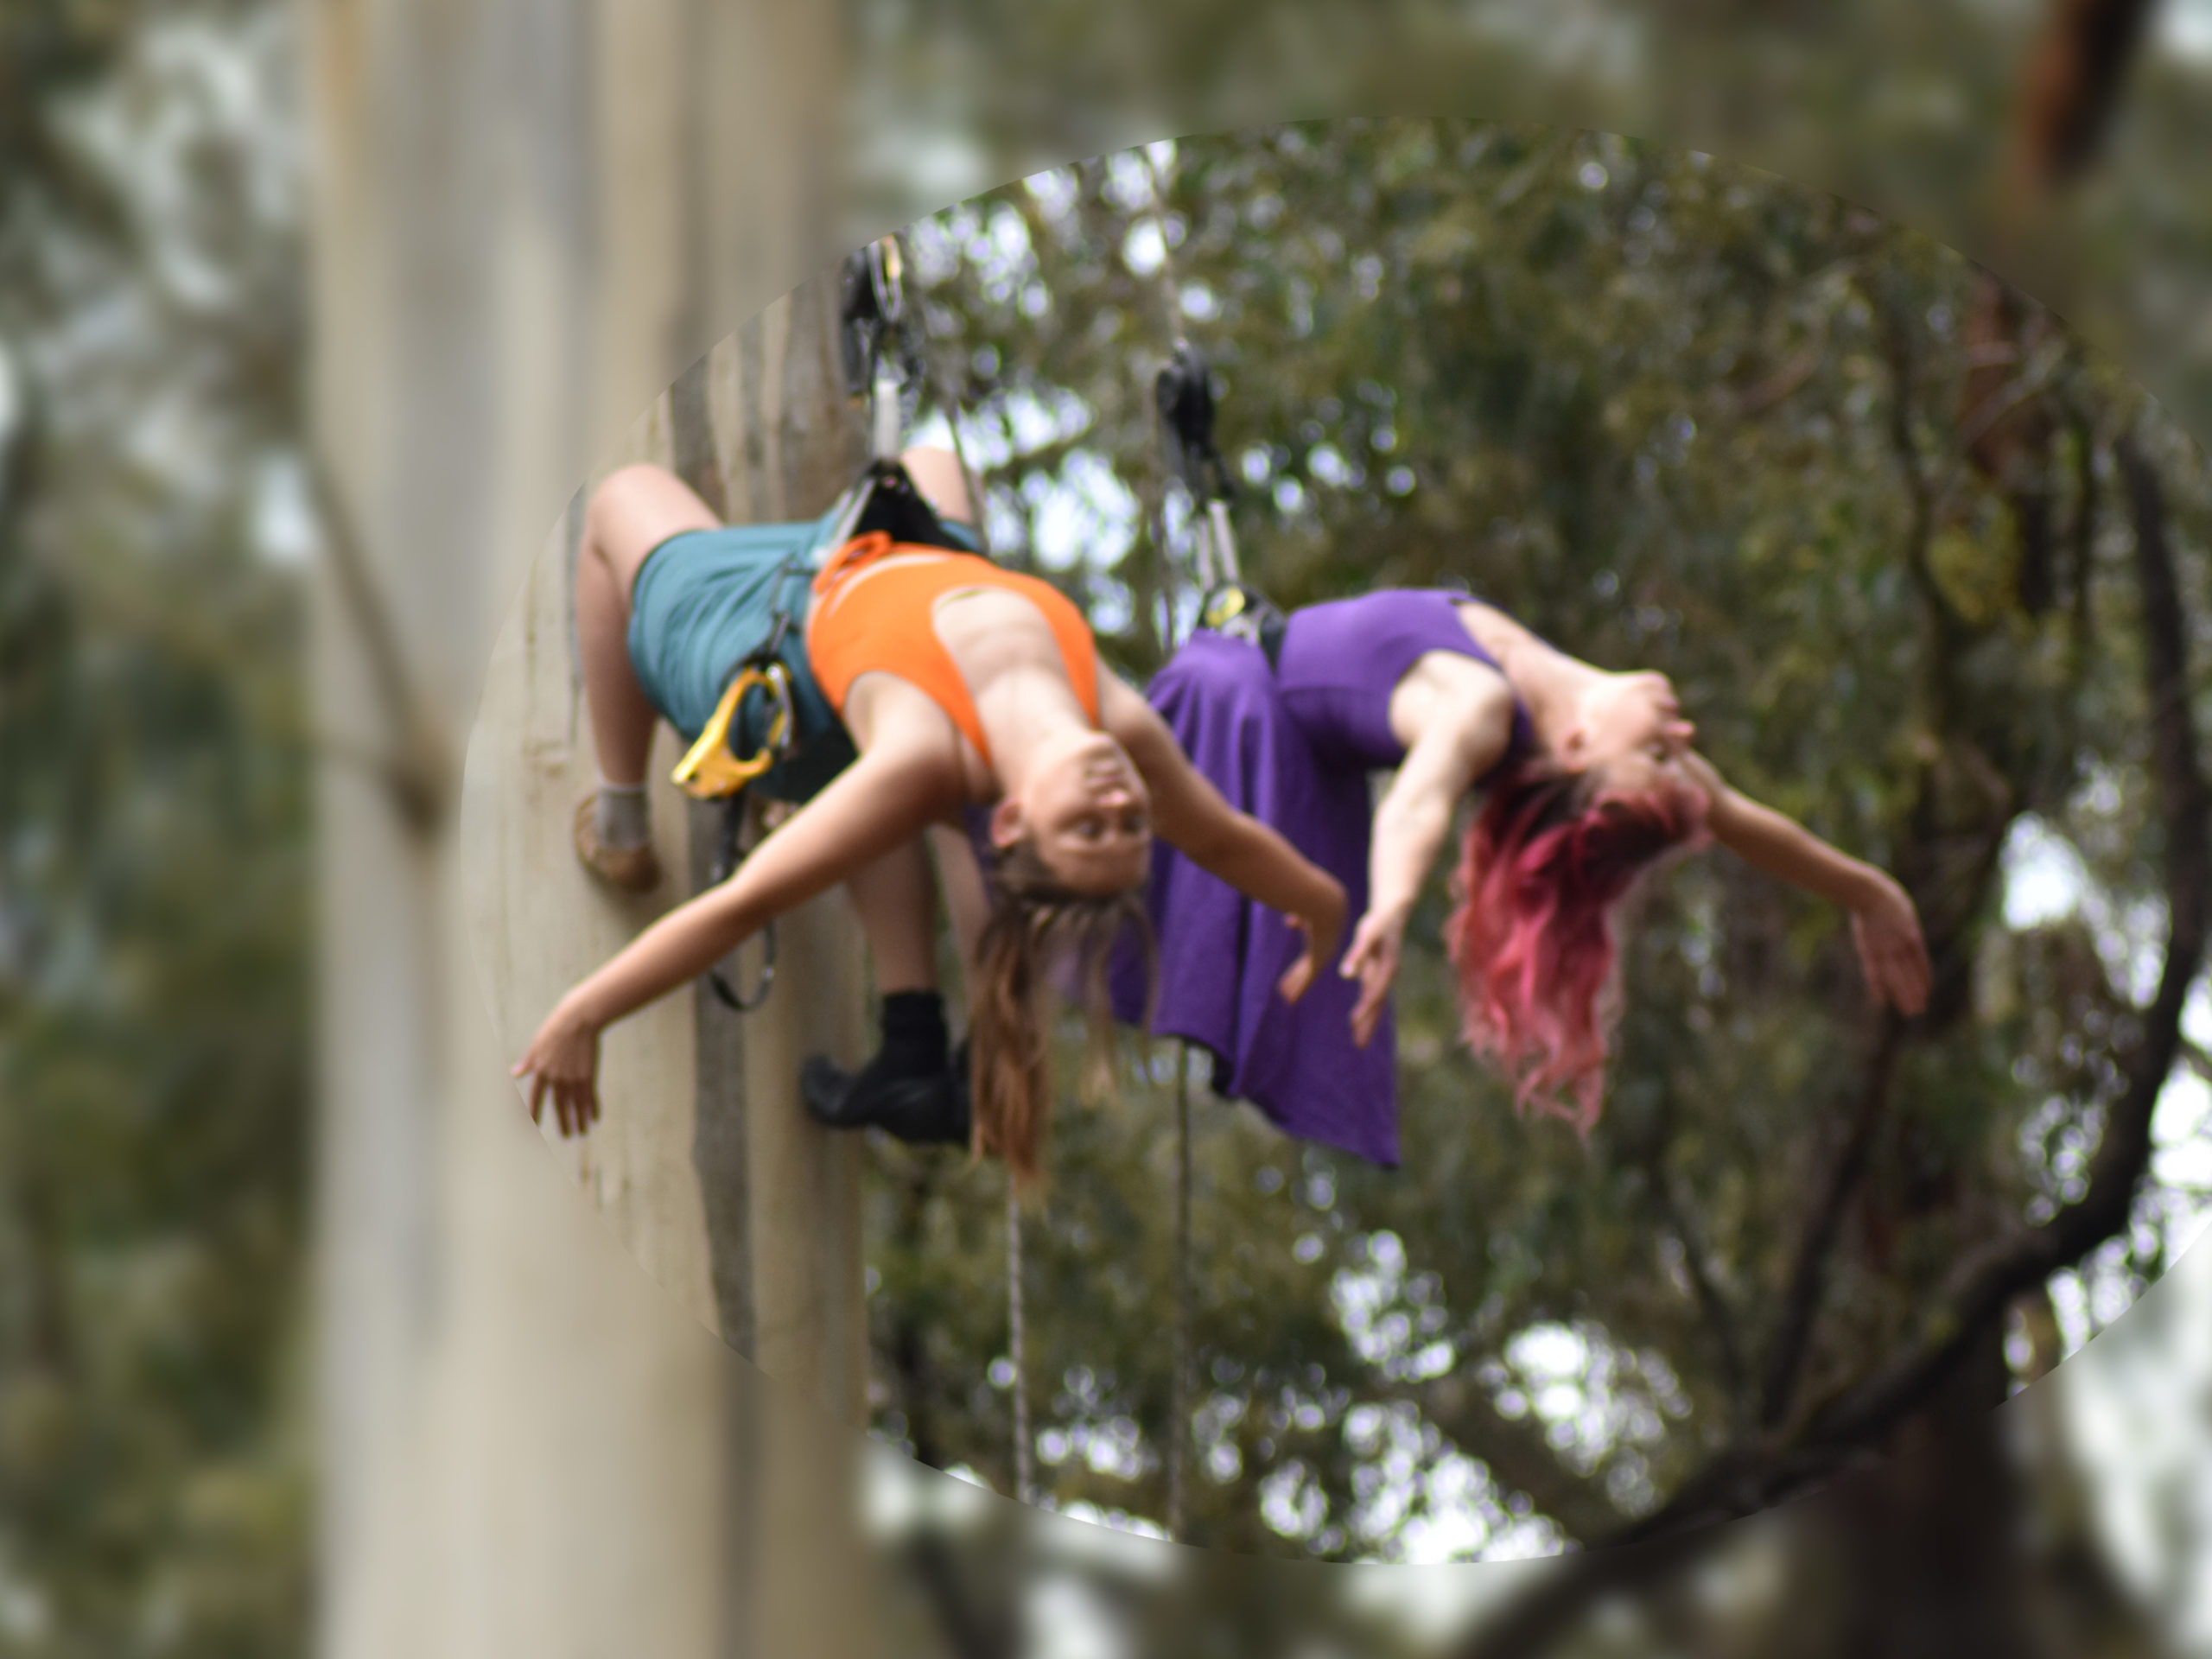 Two women are suspended from a tree, hanging vertically.